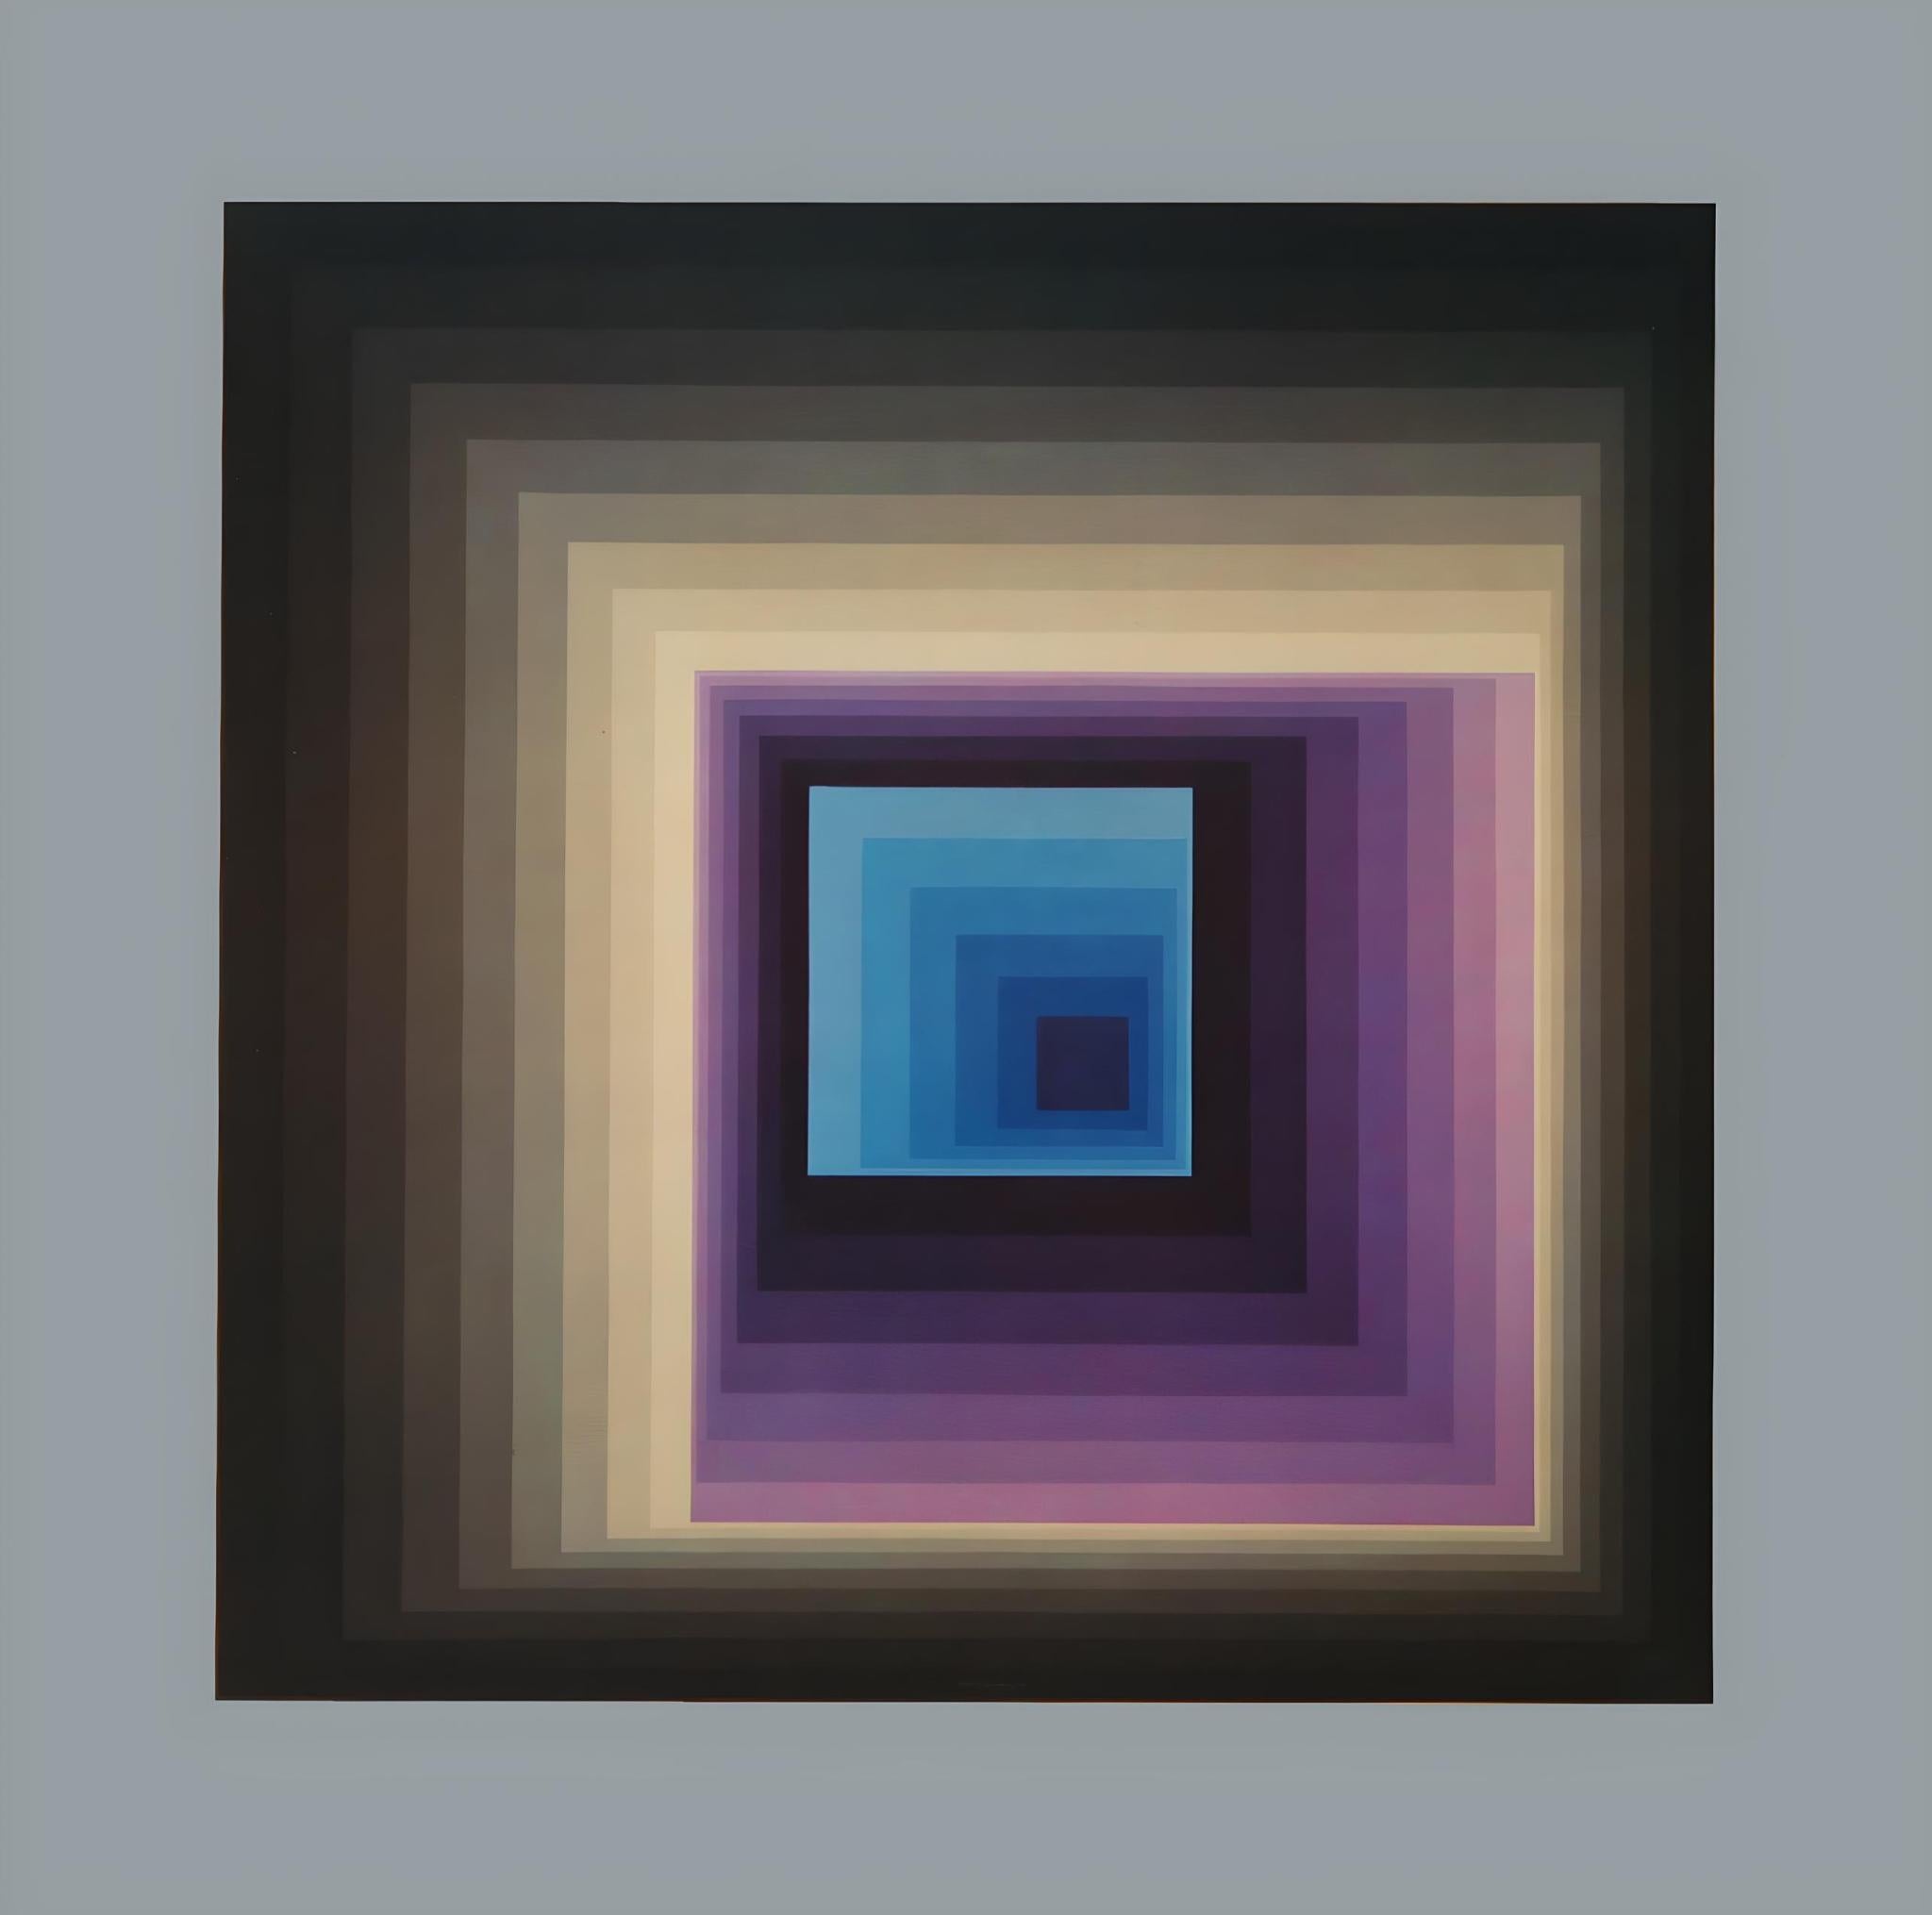 Victor Vasarely Abstract Print - Vasarely, Composition, Structures universelles du Damier (after)